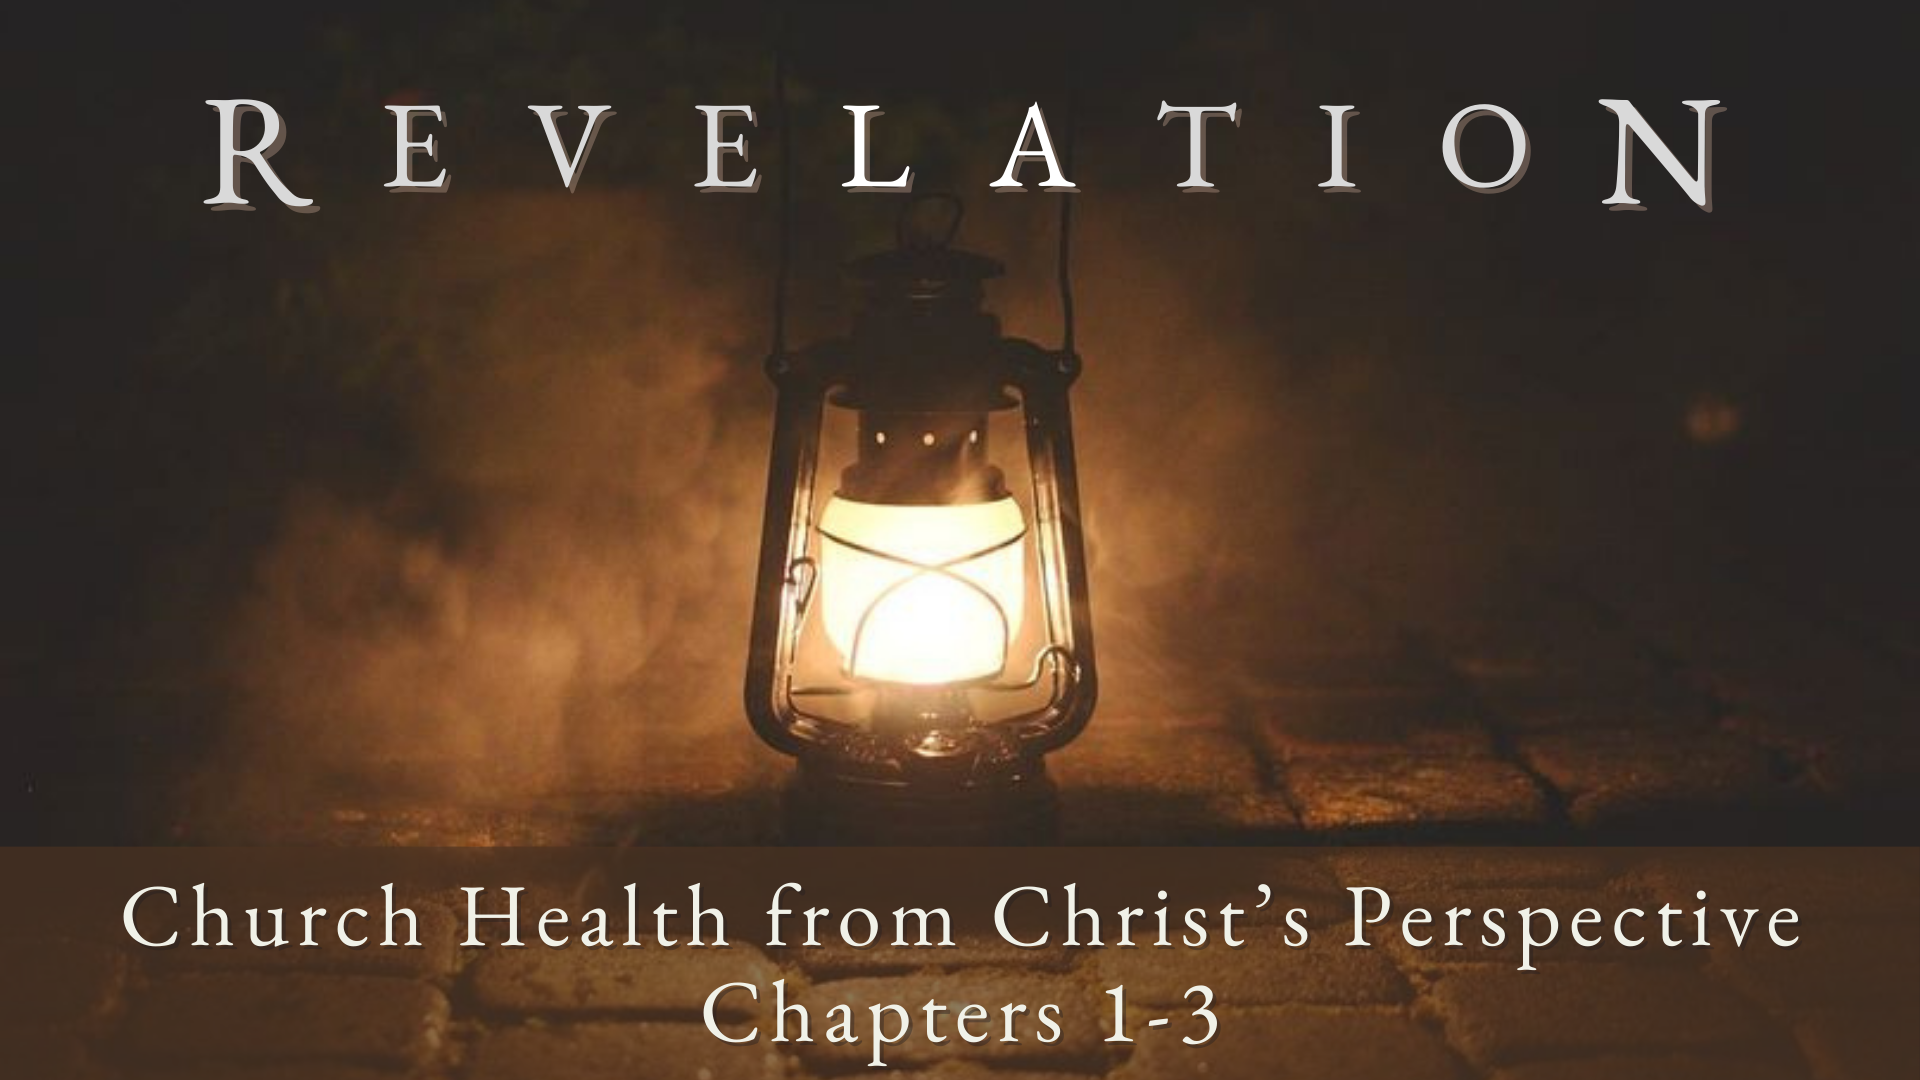 Revelation Chapters 1-3 no date